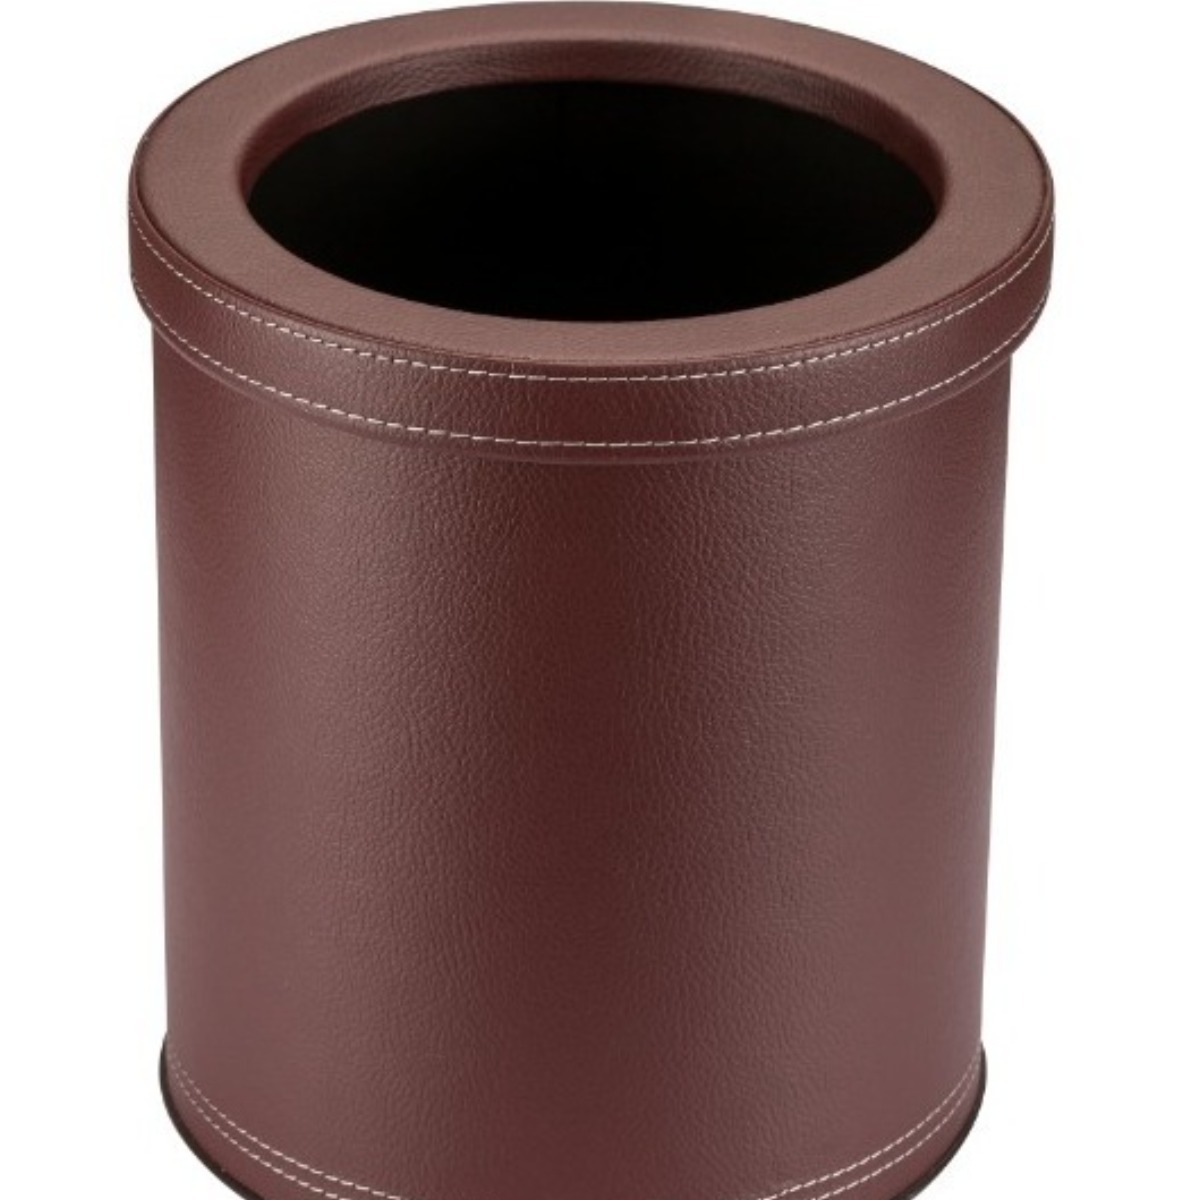 AB-315 Leather Lined Dustbin